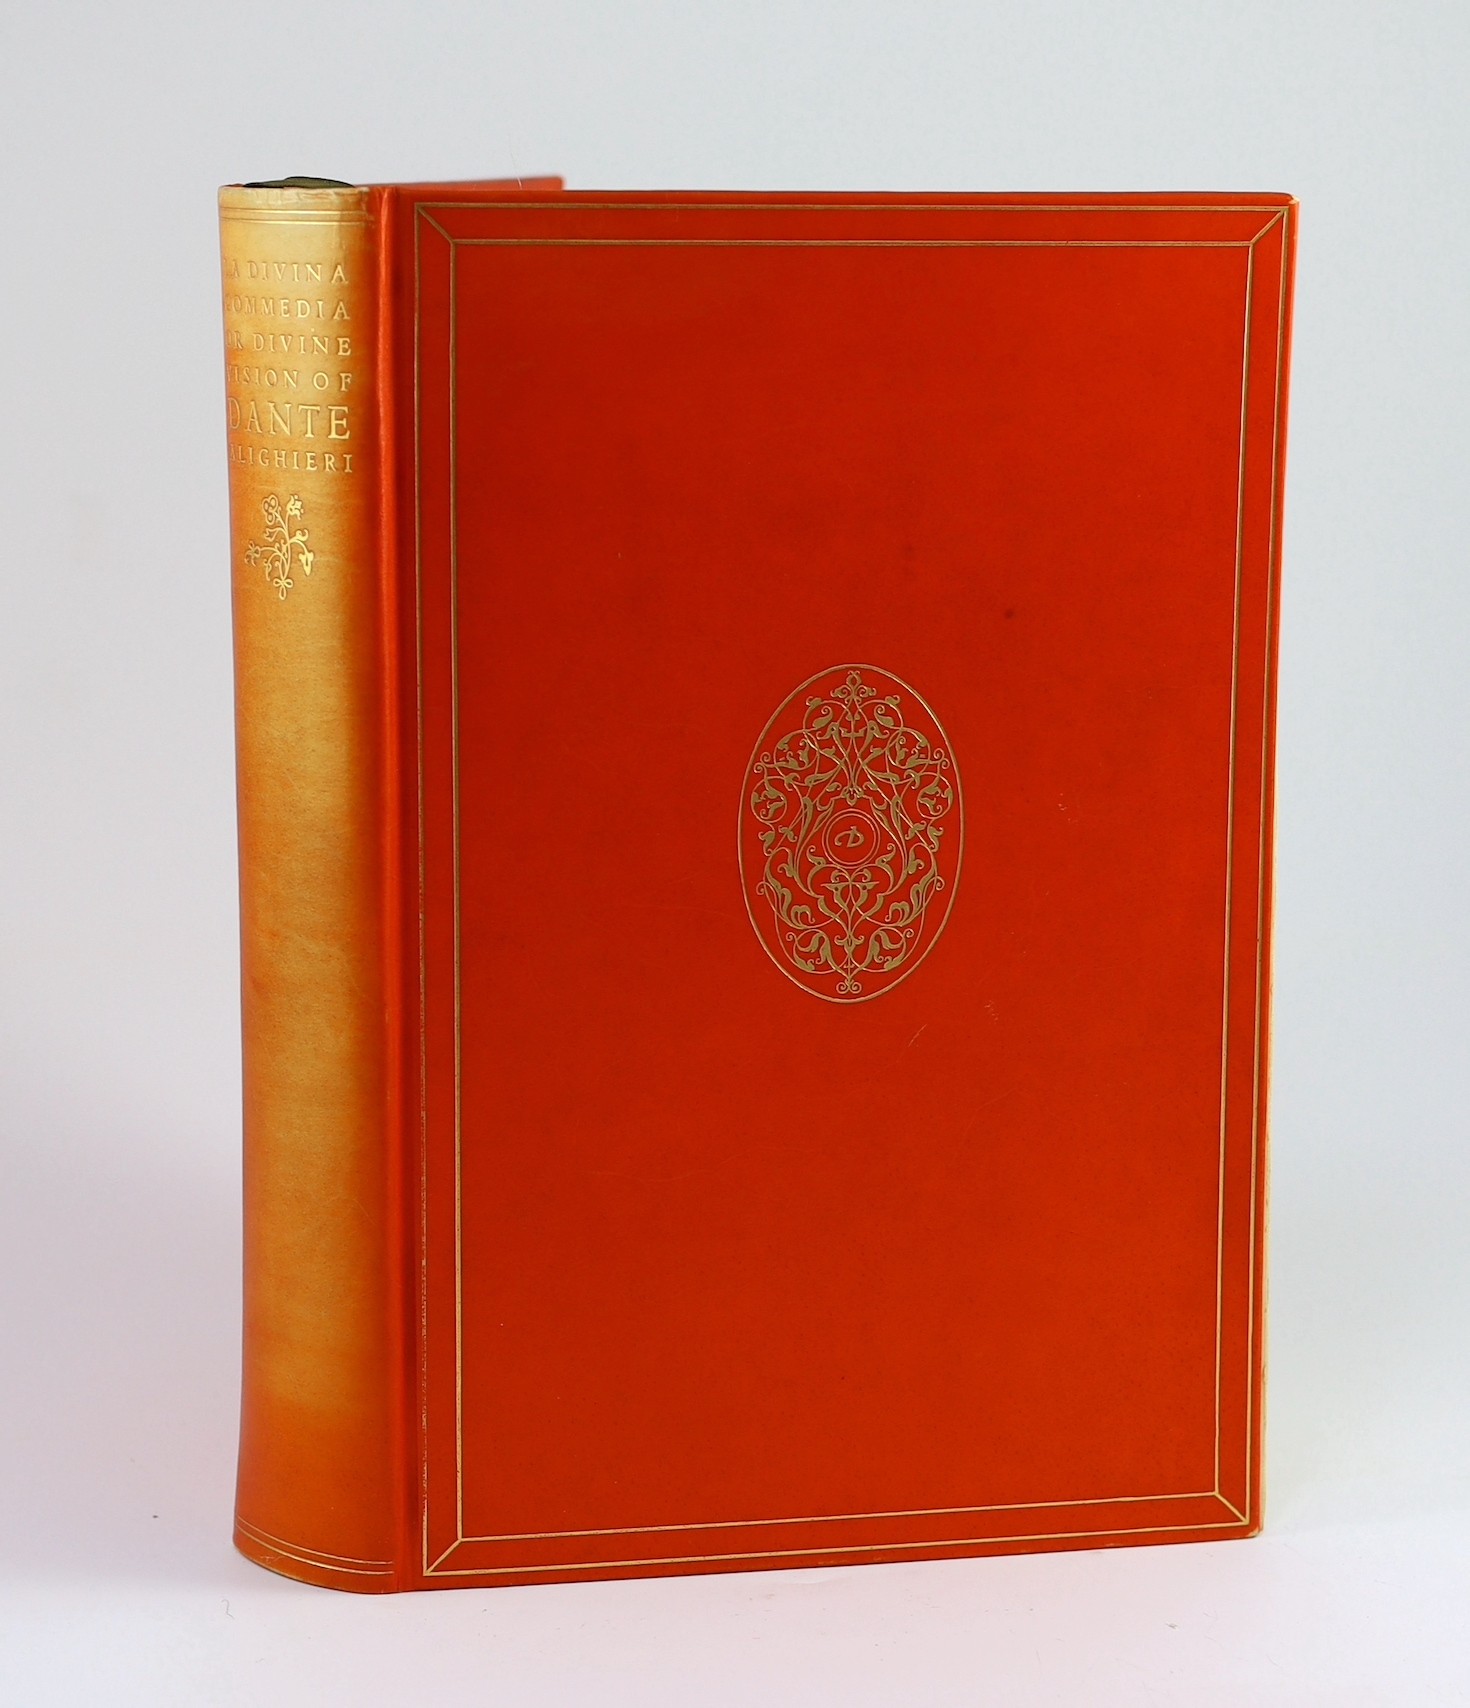 Nonesuch Press - London - Dante Alighiera - La Divina Commedia, one of 1475, with illustrations after Sandro Botticelli, 4to, original orange vellum, London, 1928, together with 2 a/l’s, from Sir Francis Meynell to Charl